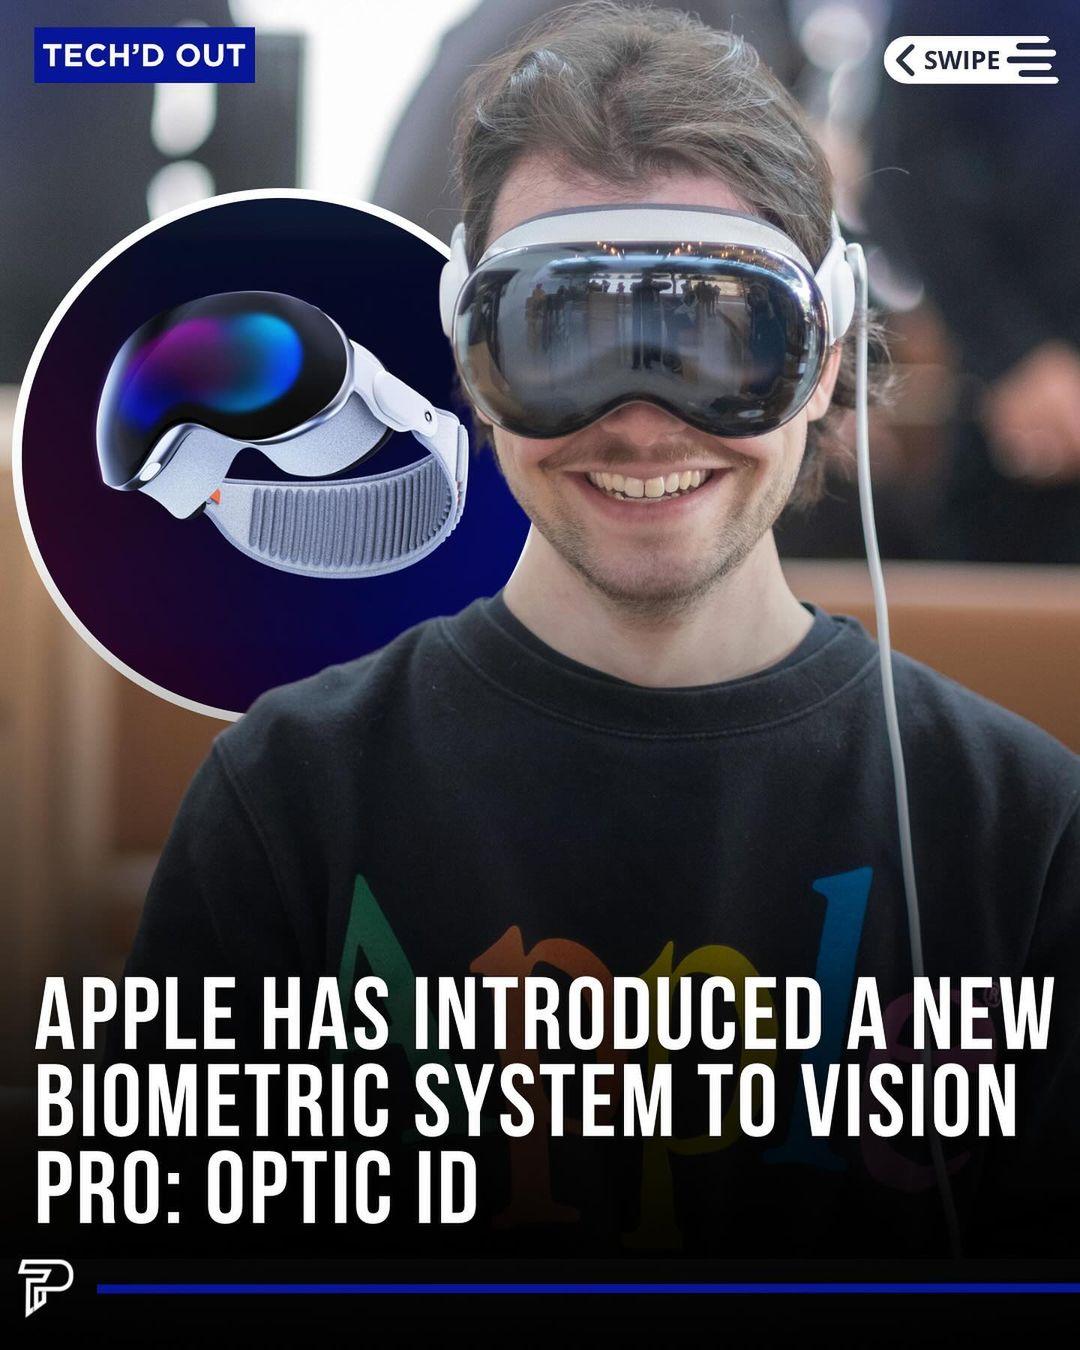 Apple Vision Pro, the latest innovation from Apple, features Optic ID, a cutting-edge iris recognition technology 👁️

Similar to Touch ID and Face ID, Optic ID revolutionizes authentication, offering secure and intuitive authentication.

Enabled by Apple Vision Pro’s advanced eye-tracking system, it ensures privacy and security with just a glance, unlocking your device effortlessly.

-

#apple #visionpro #tech #innovation #pubity